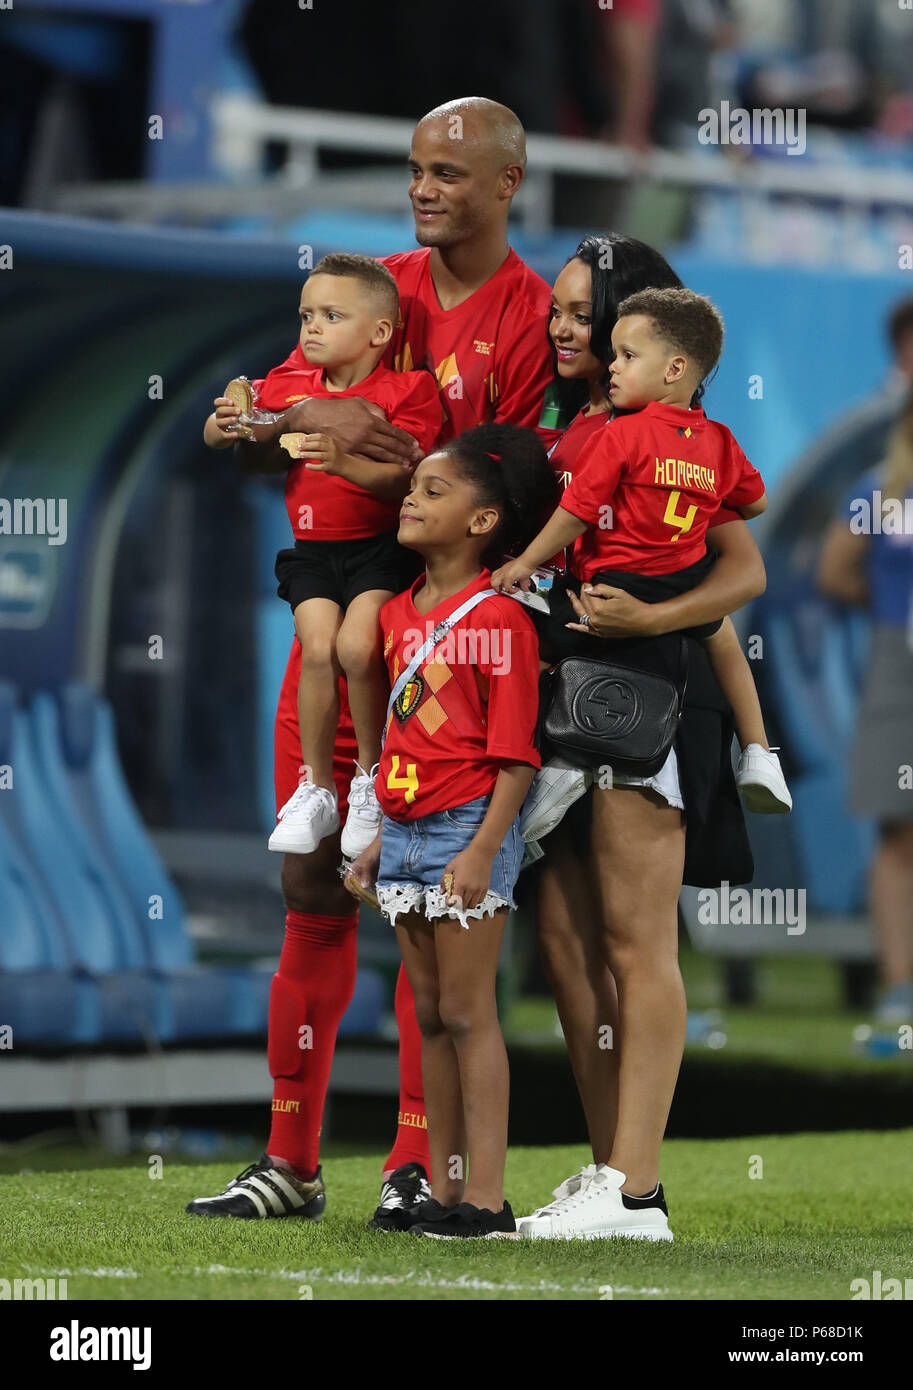 Kaliningrad, Russia. 28th June, 2018. Vincent Kompany of Belgium poses for photos with his family after the 2018 FIFA World Cup Group G match between England and Belgium in Kaliningrad, Russia, June 28, 2018. Belgium won 1-0. England and Belgium advanced to the round of 16. Credit: Bai Xueqi/Xinhua/Alamy Live News Stock Photo